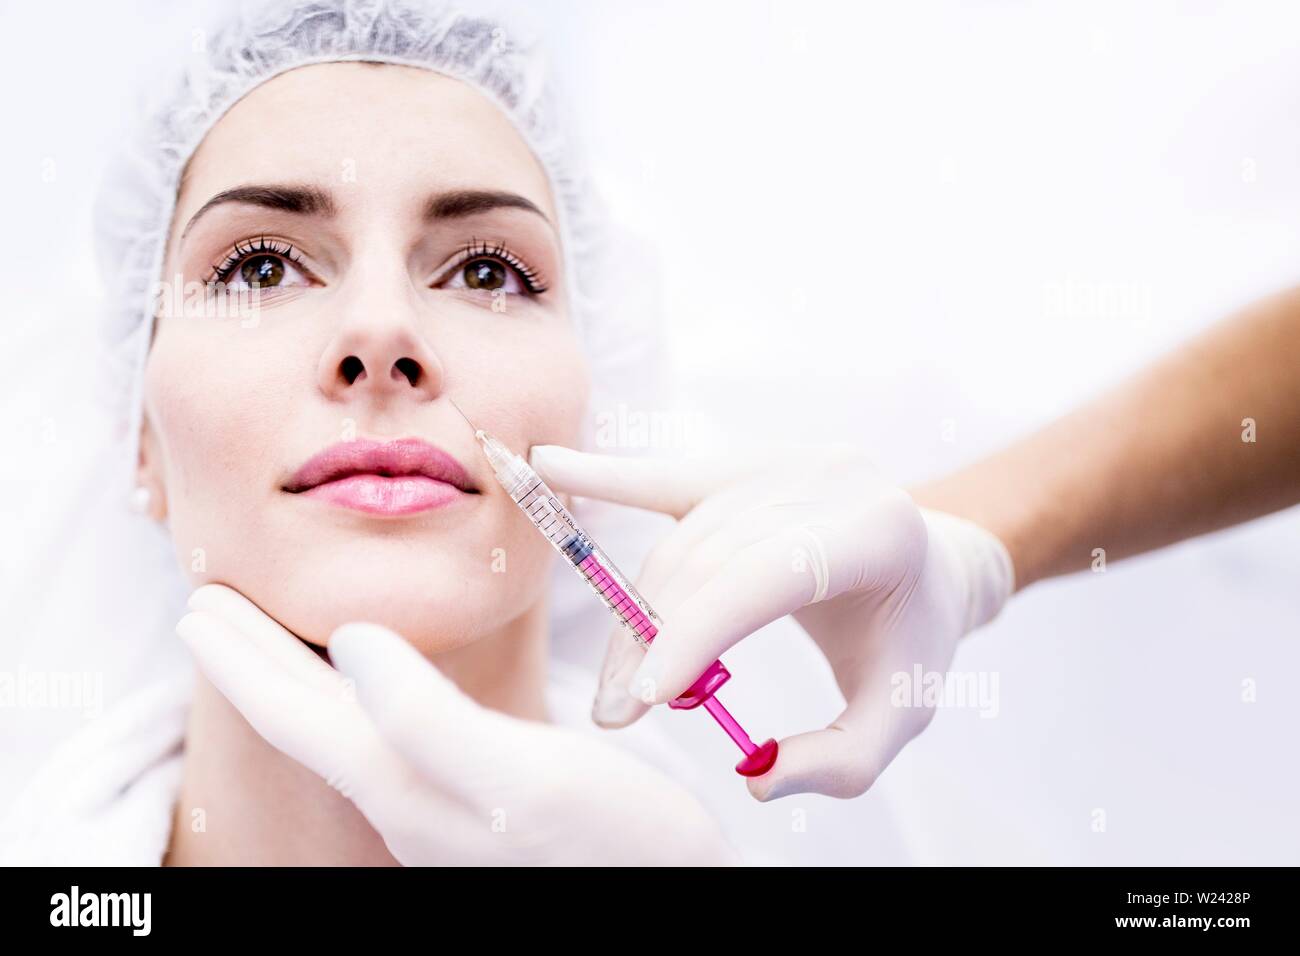 Young woman injecting botox injection on face, close-up. Stock Photo